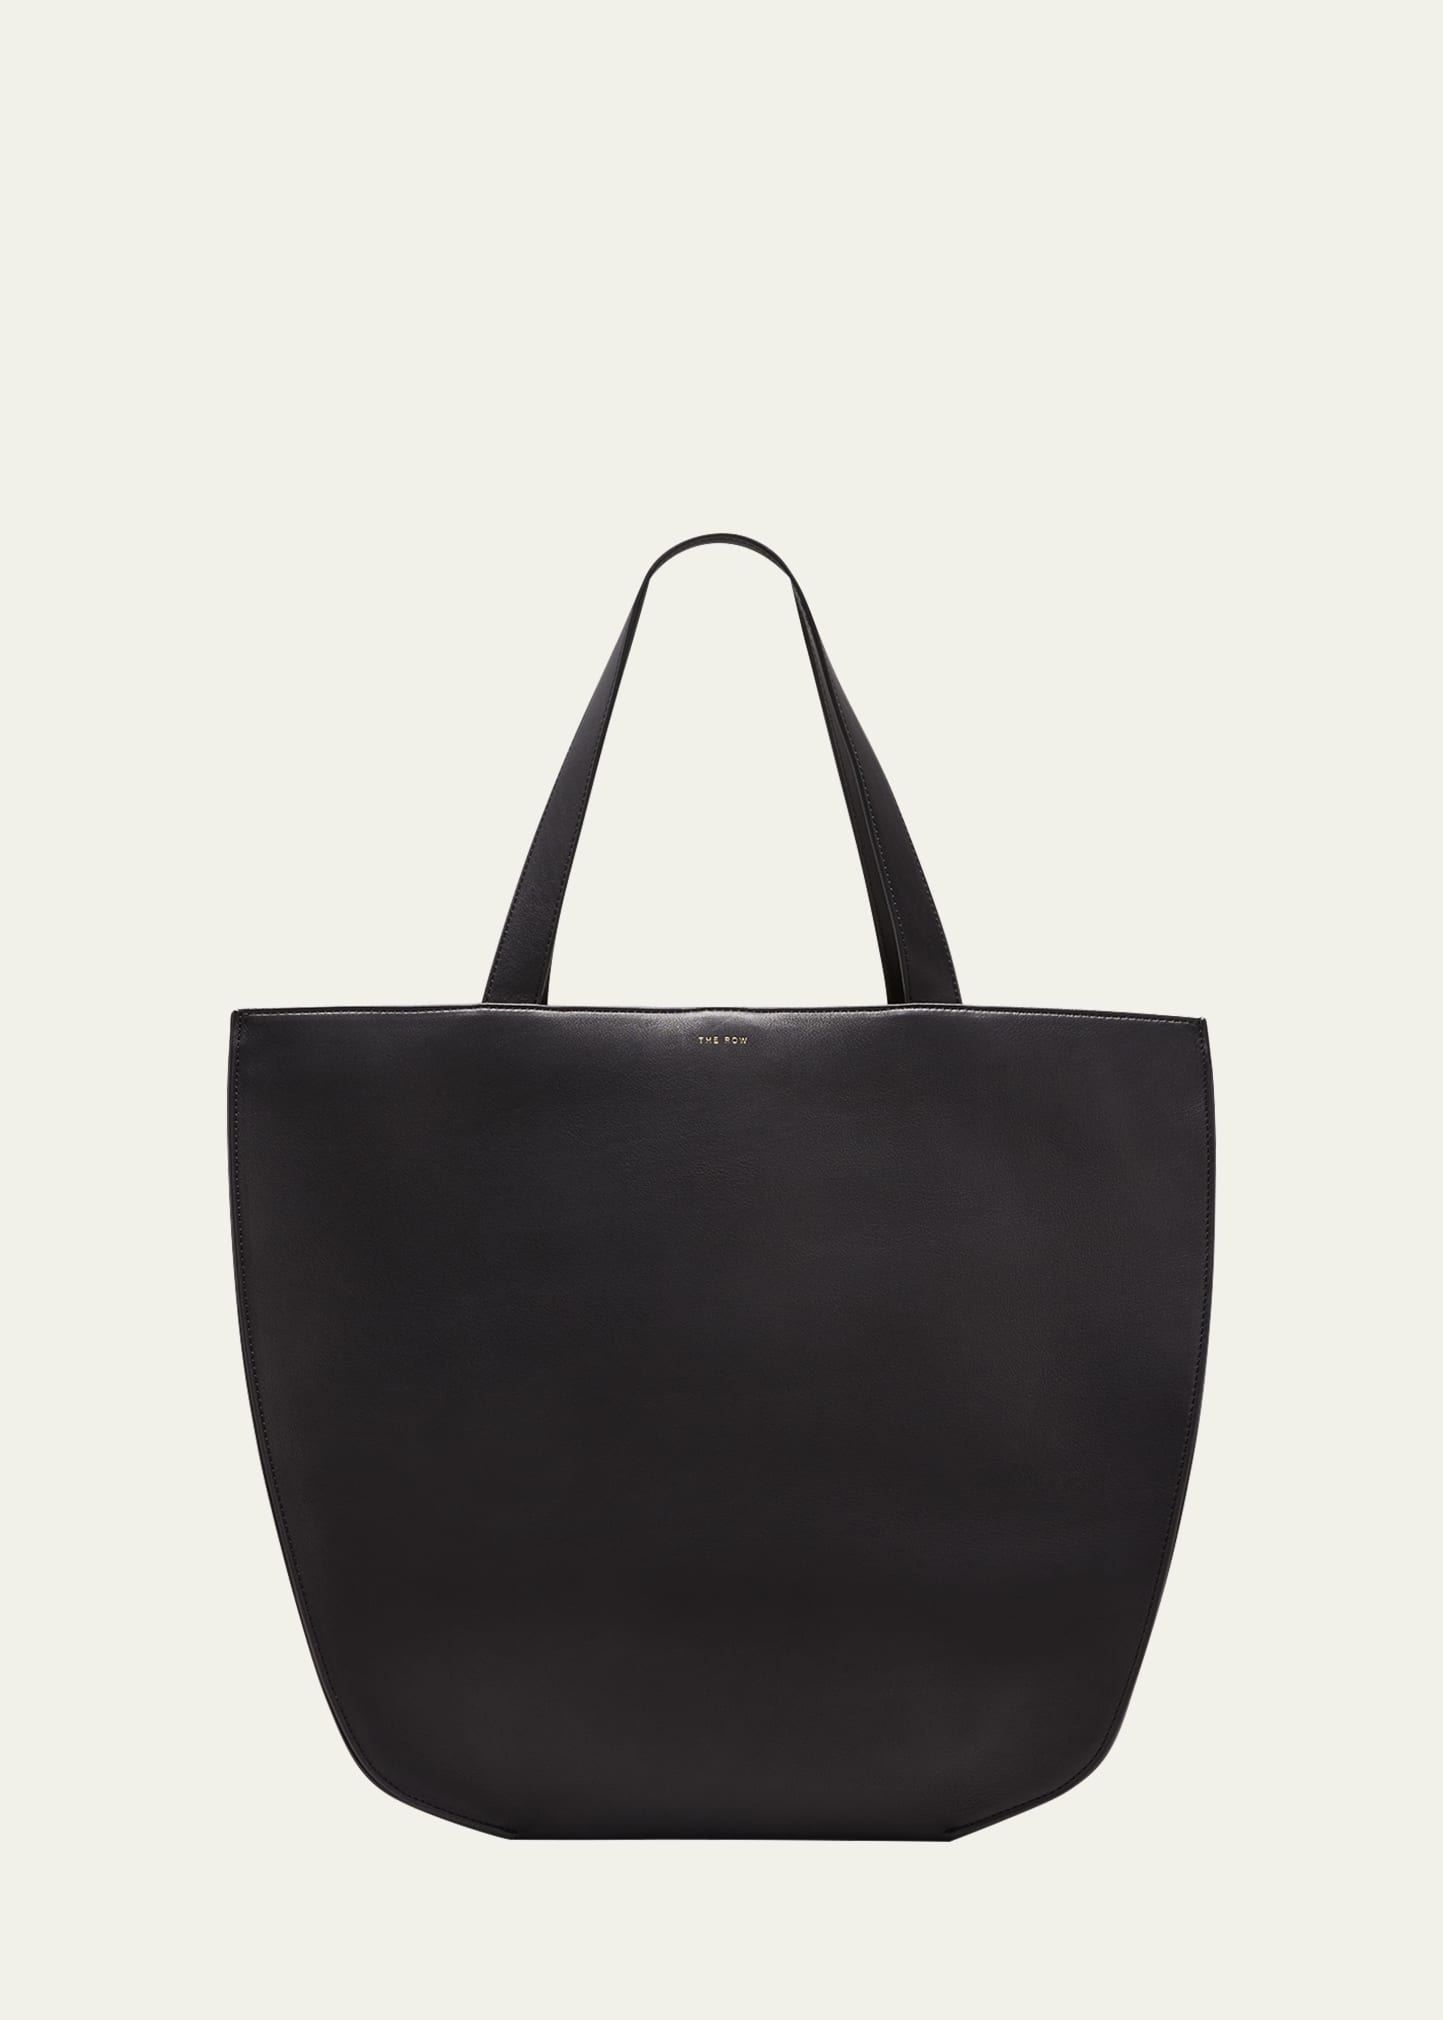 THE ROW GRAHAM TOTE BAG IN SADDLE LEATHER